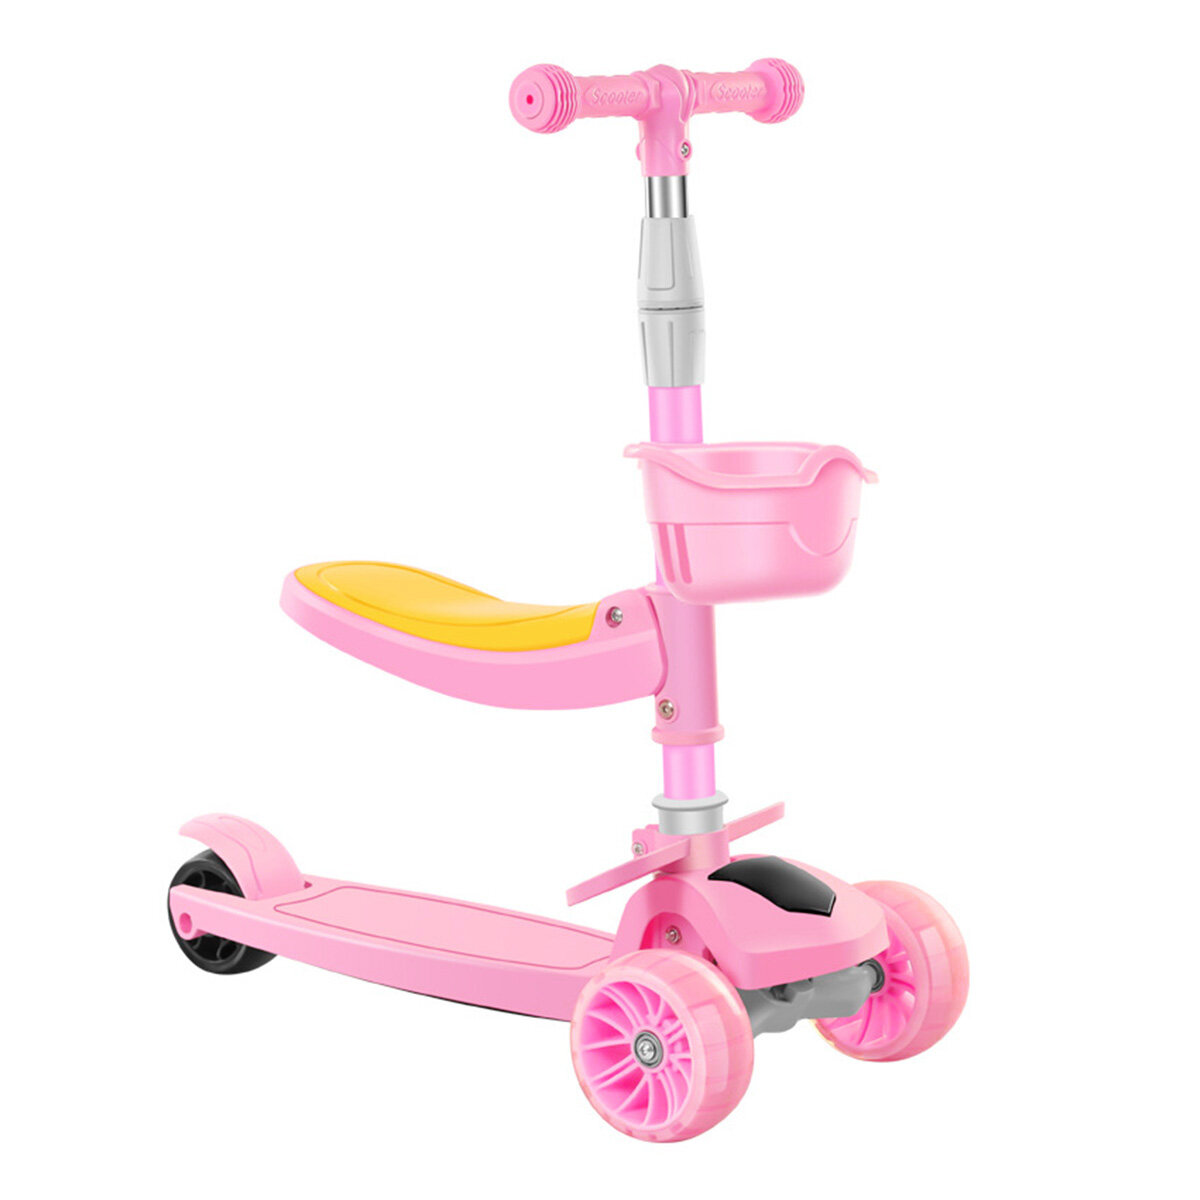 3 Wheels Kids Adjustable Kick Scooter with Folding Seat＆Flashing Wheel for Aged 3-6 Roller Children Toy